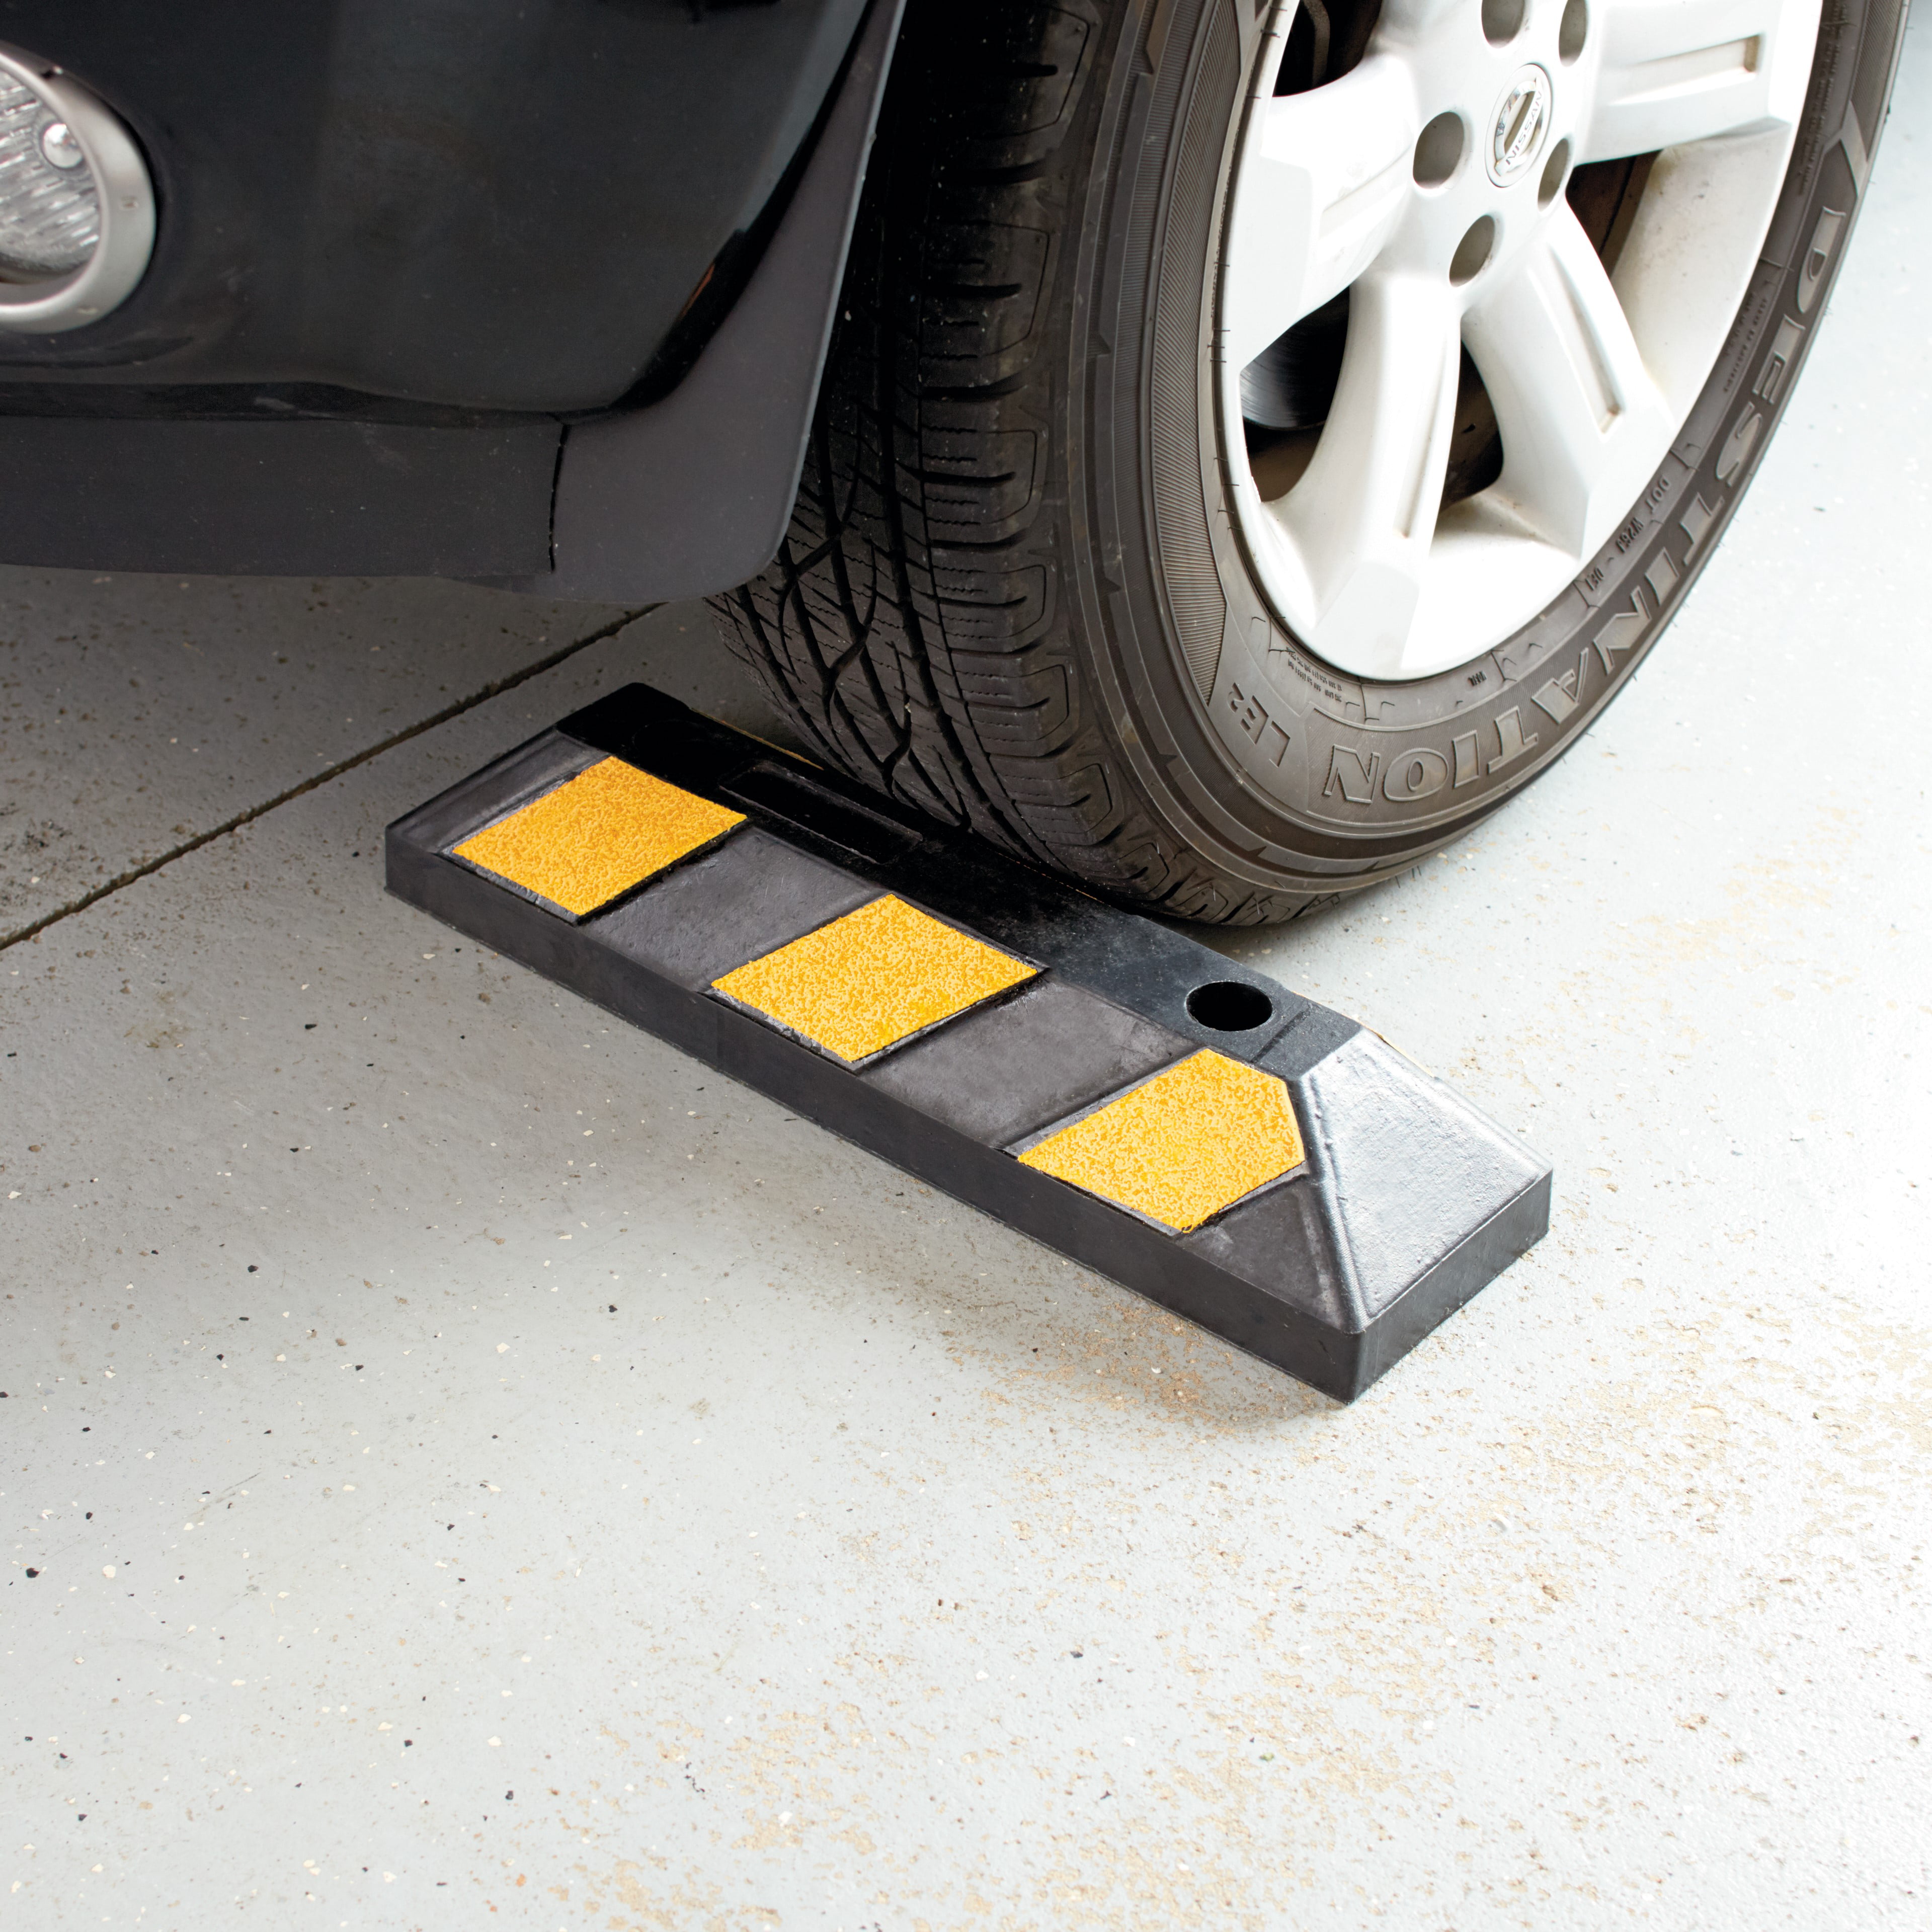 Parking Barrier Slip Block Tyre Slip Stopper Wheel Block Tire Support Pad Helps Keep Your Cars In Place N/J Rubber Parking Wheel Stop Rubber Floor Wheel Stop For Parking Lots An Garages